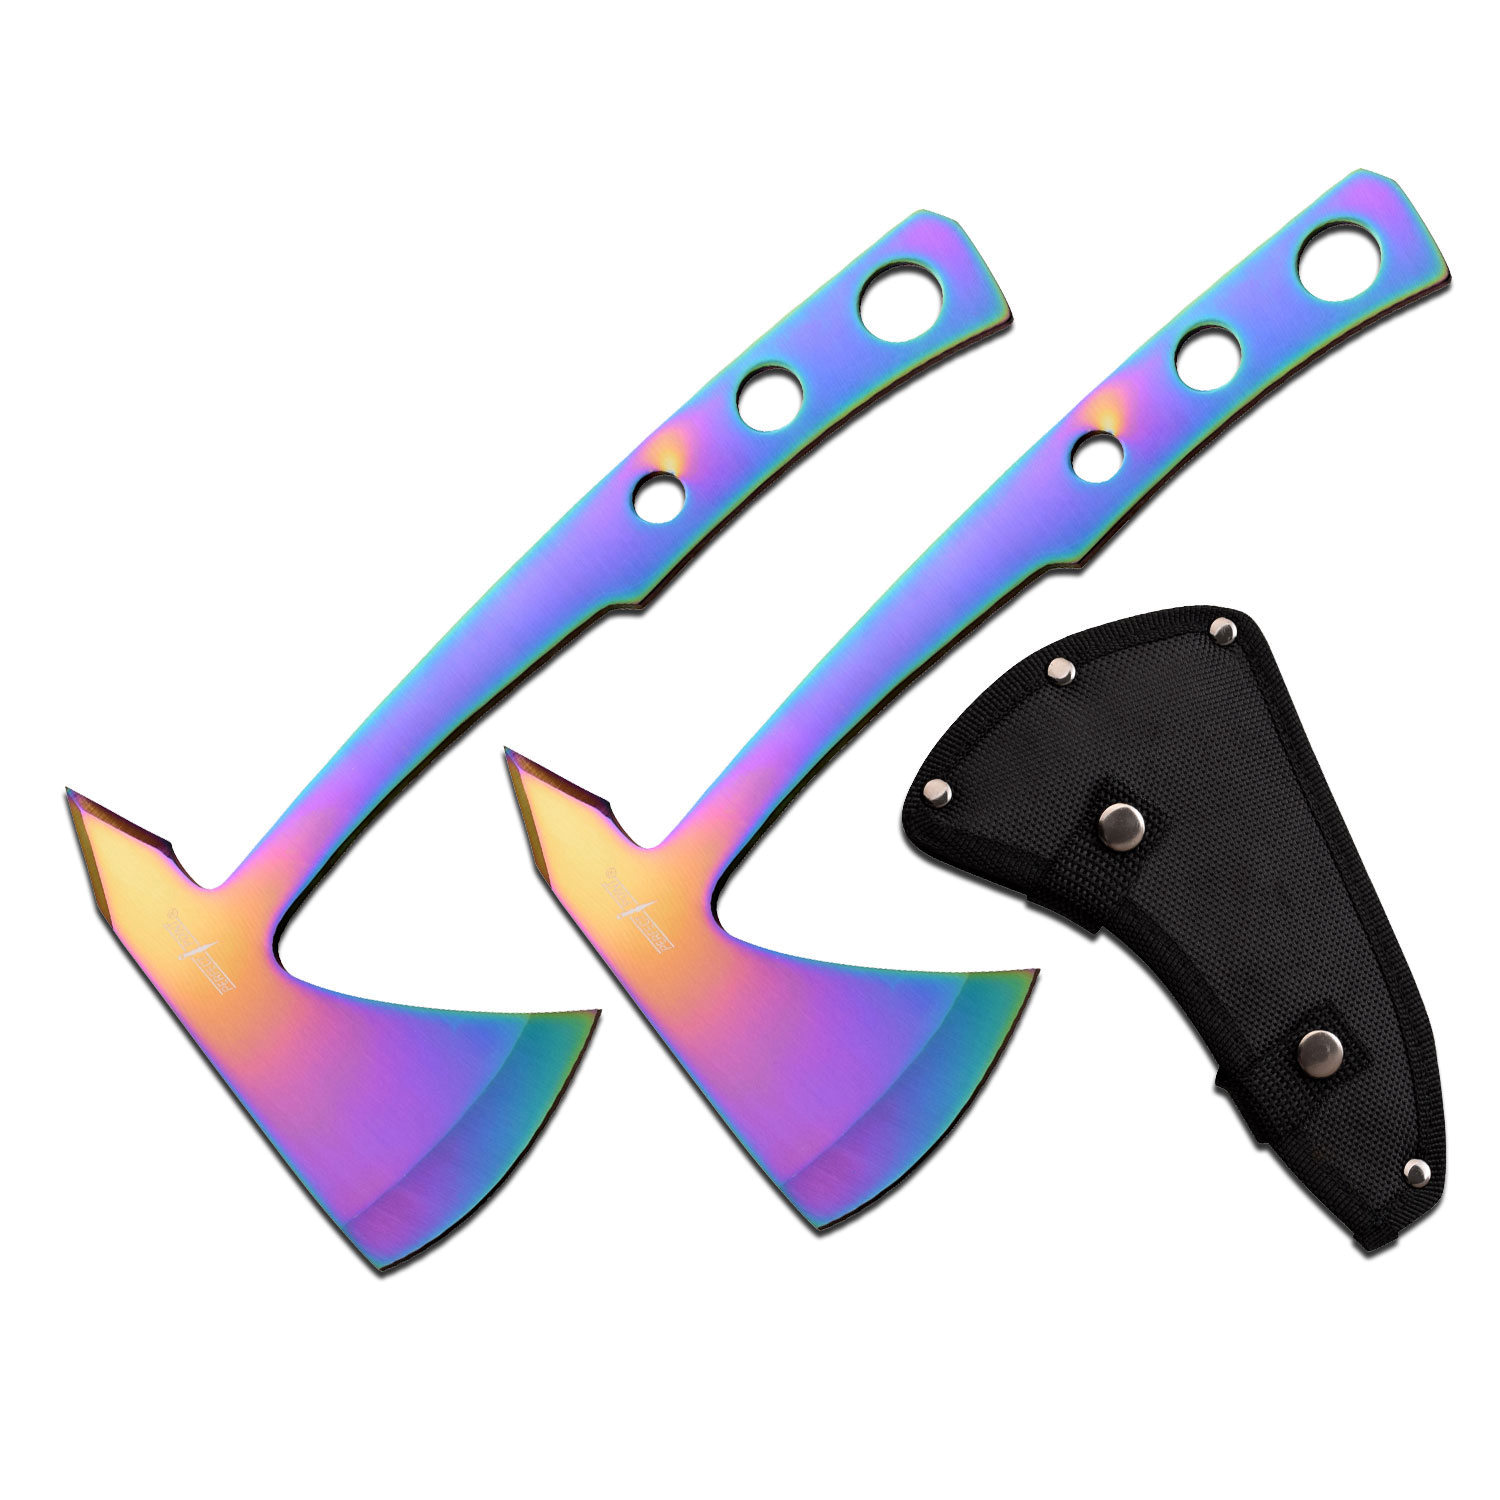 product image for Perfect-Point Rainbow Throwing Axe Set 2 Pc Stainless Steel Tomahawk Throwers Sheath